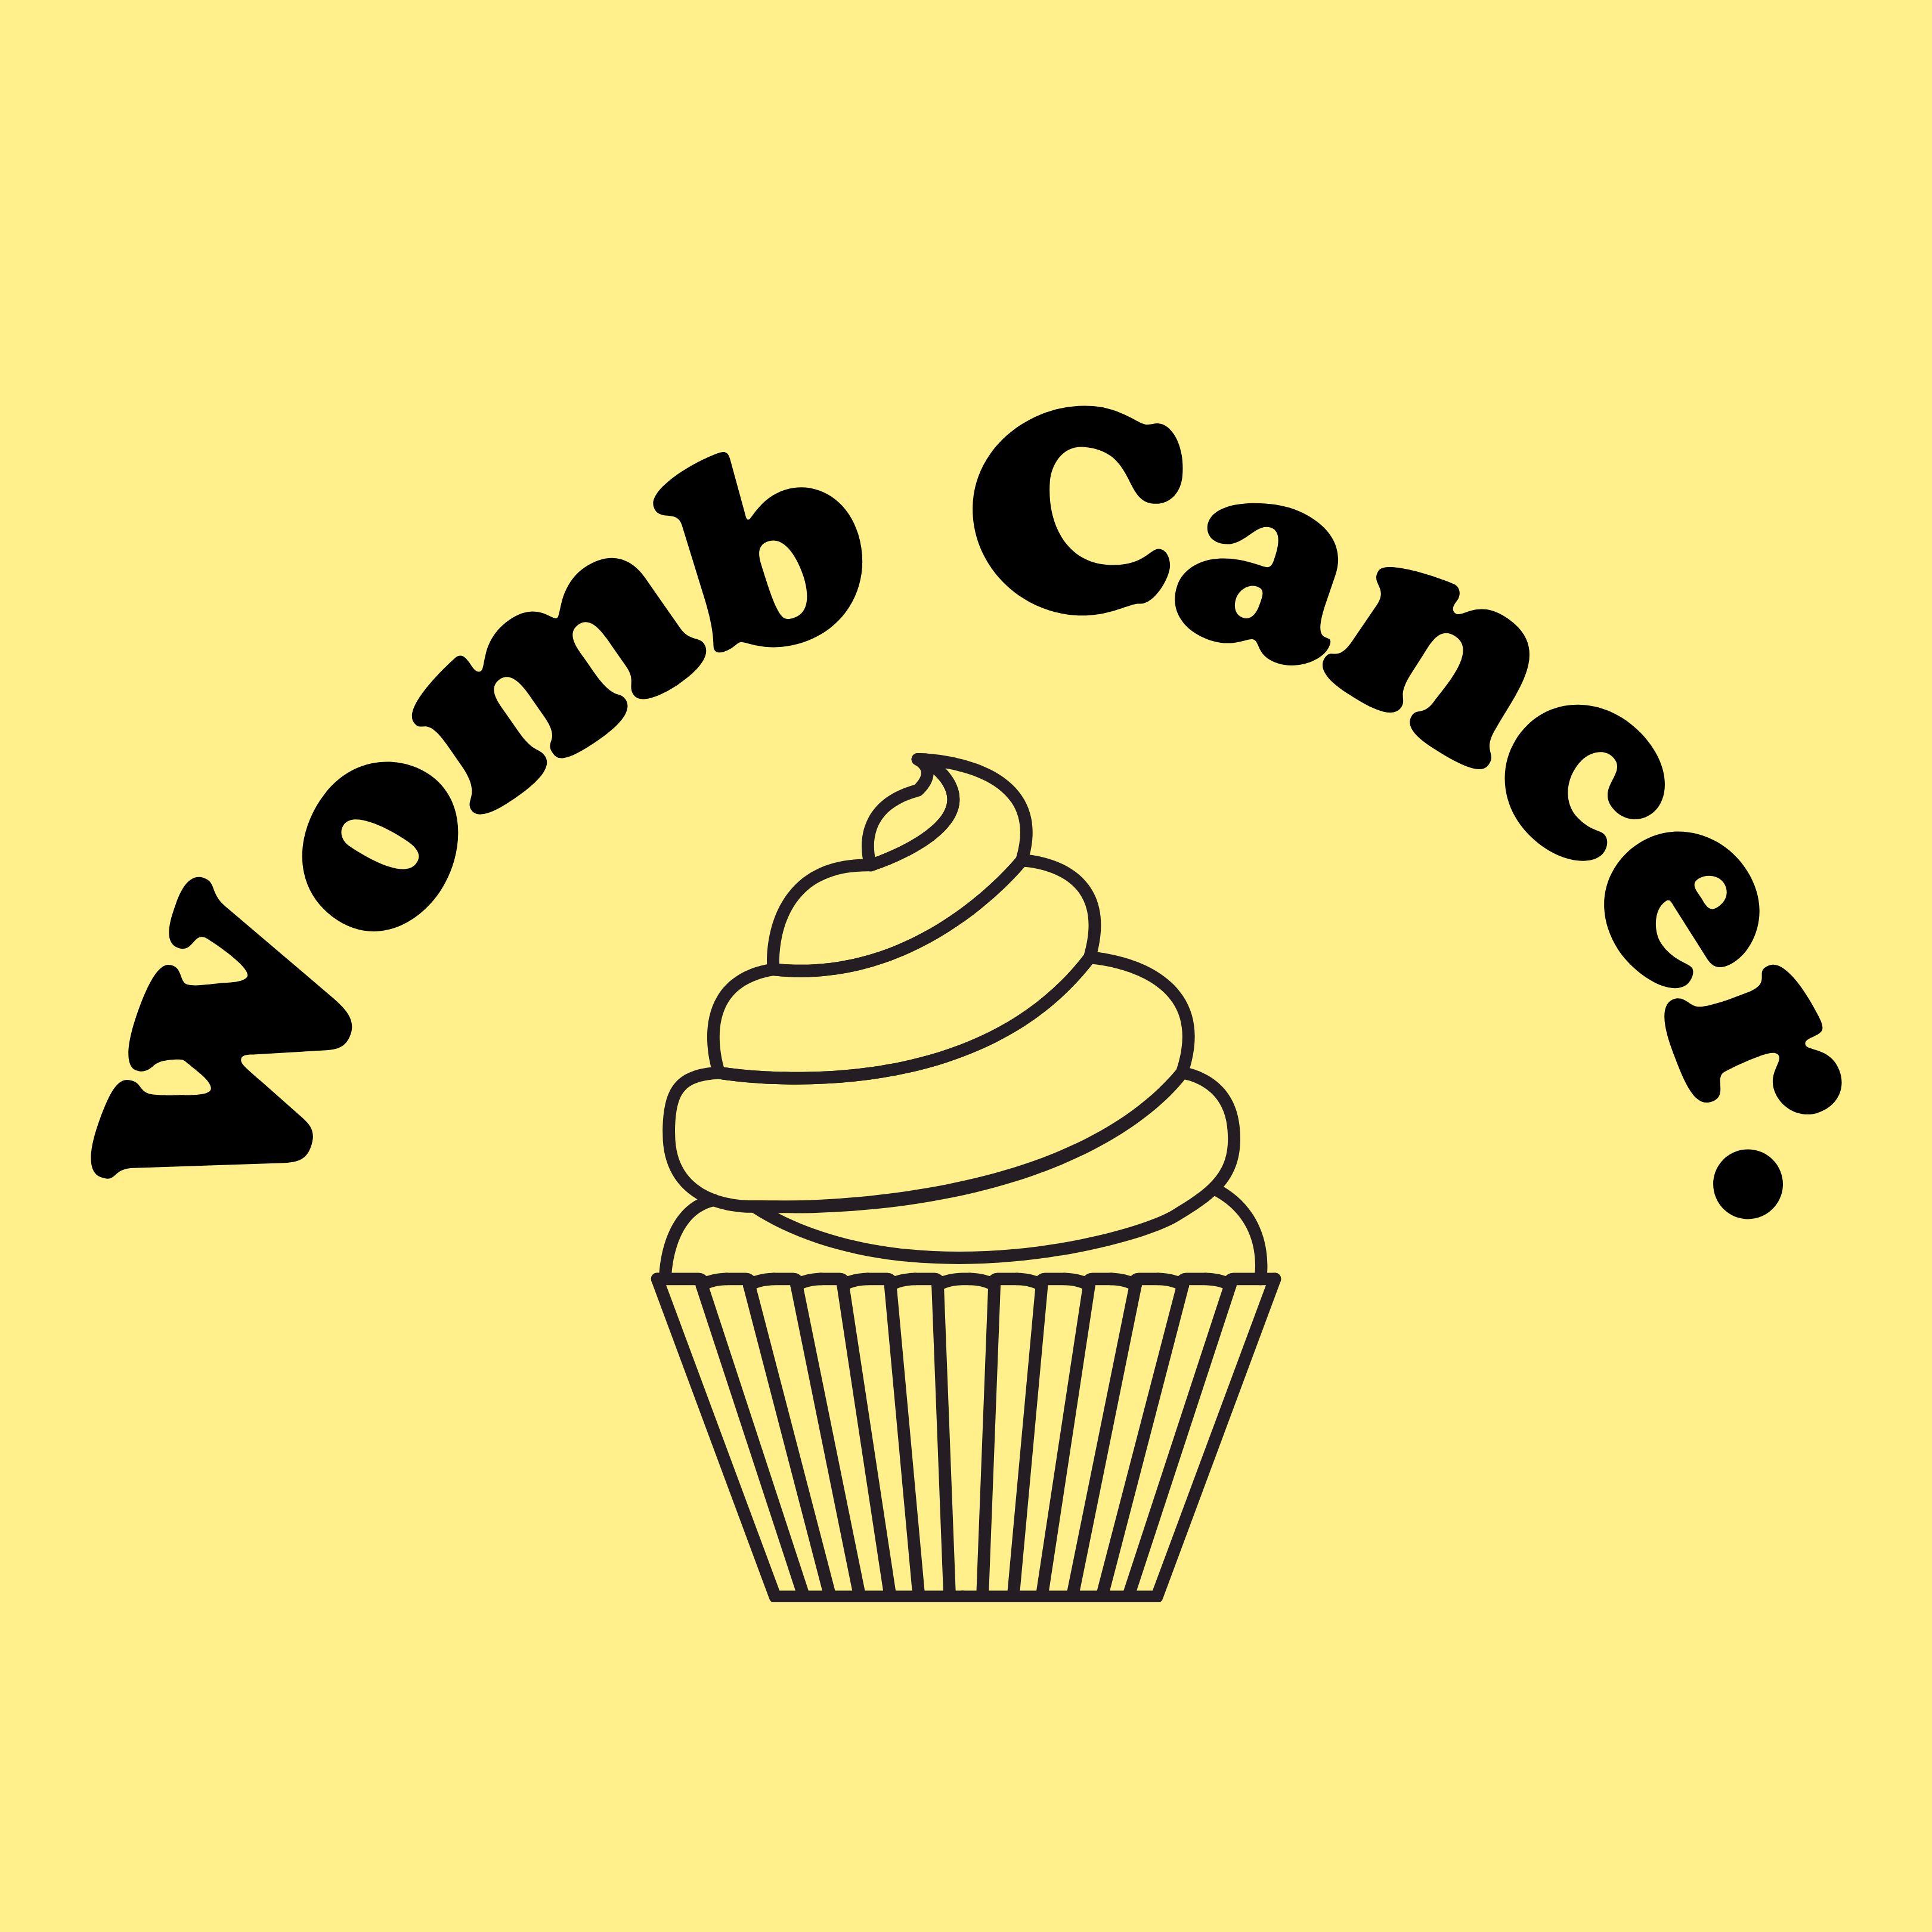 Womb Cancer